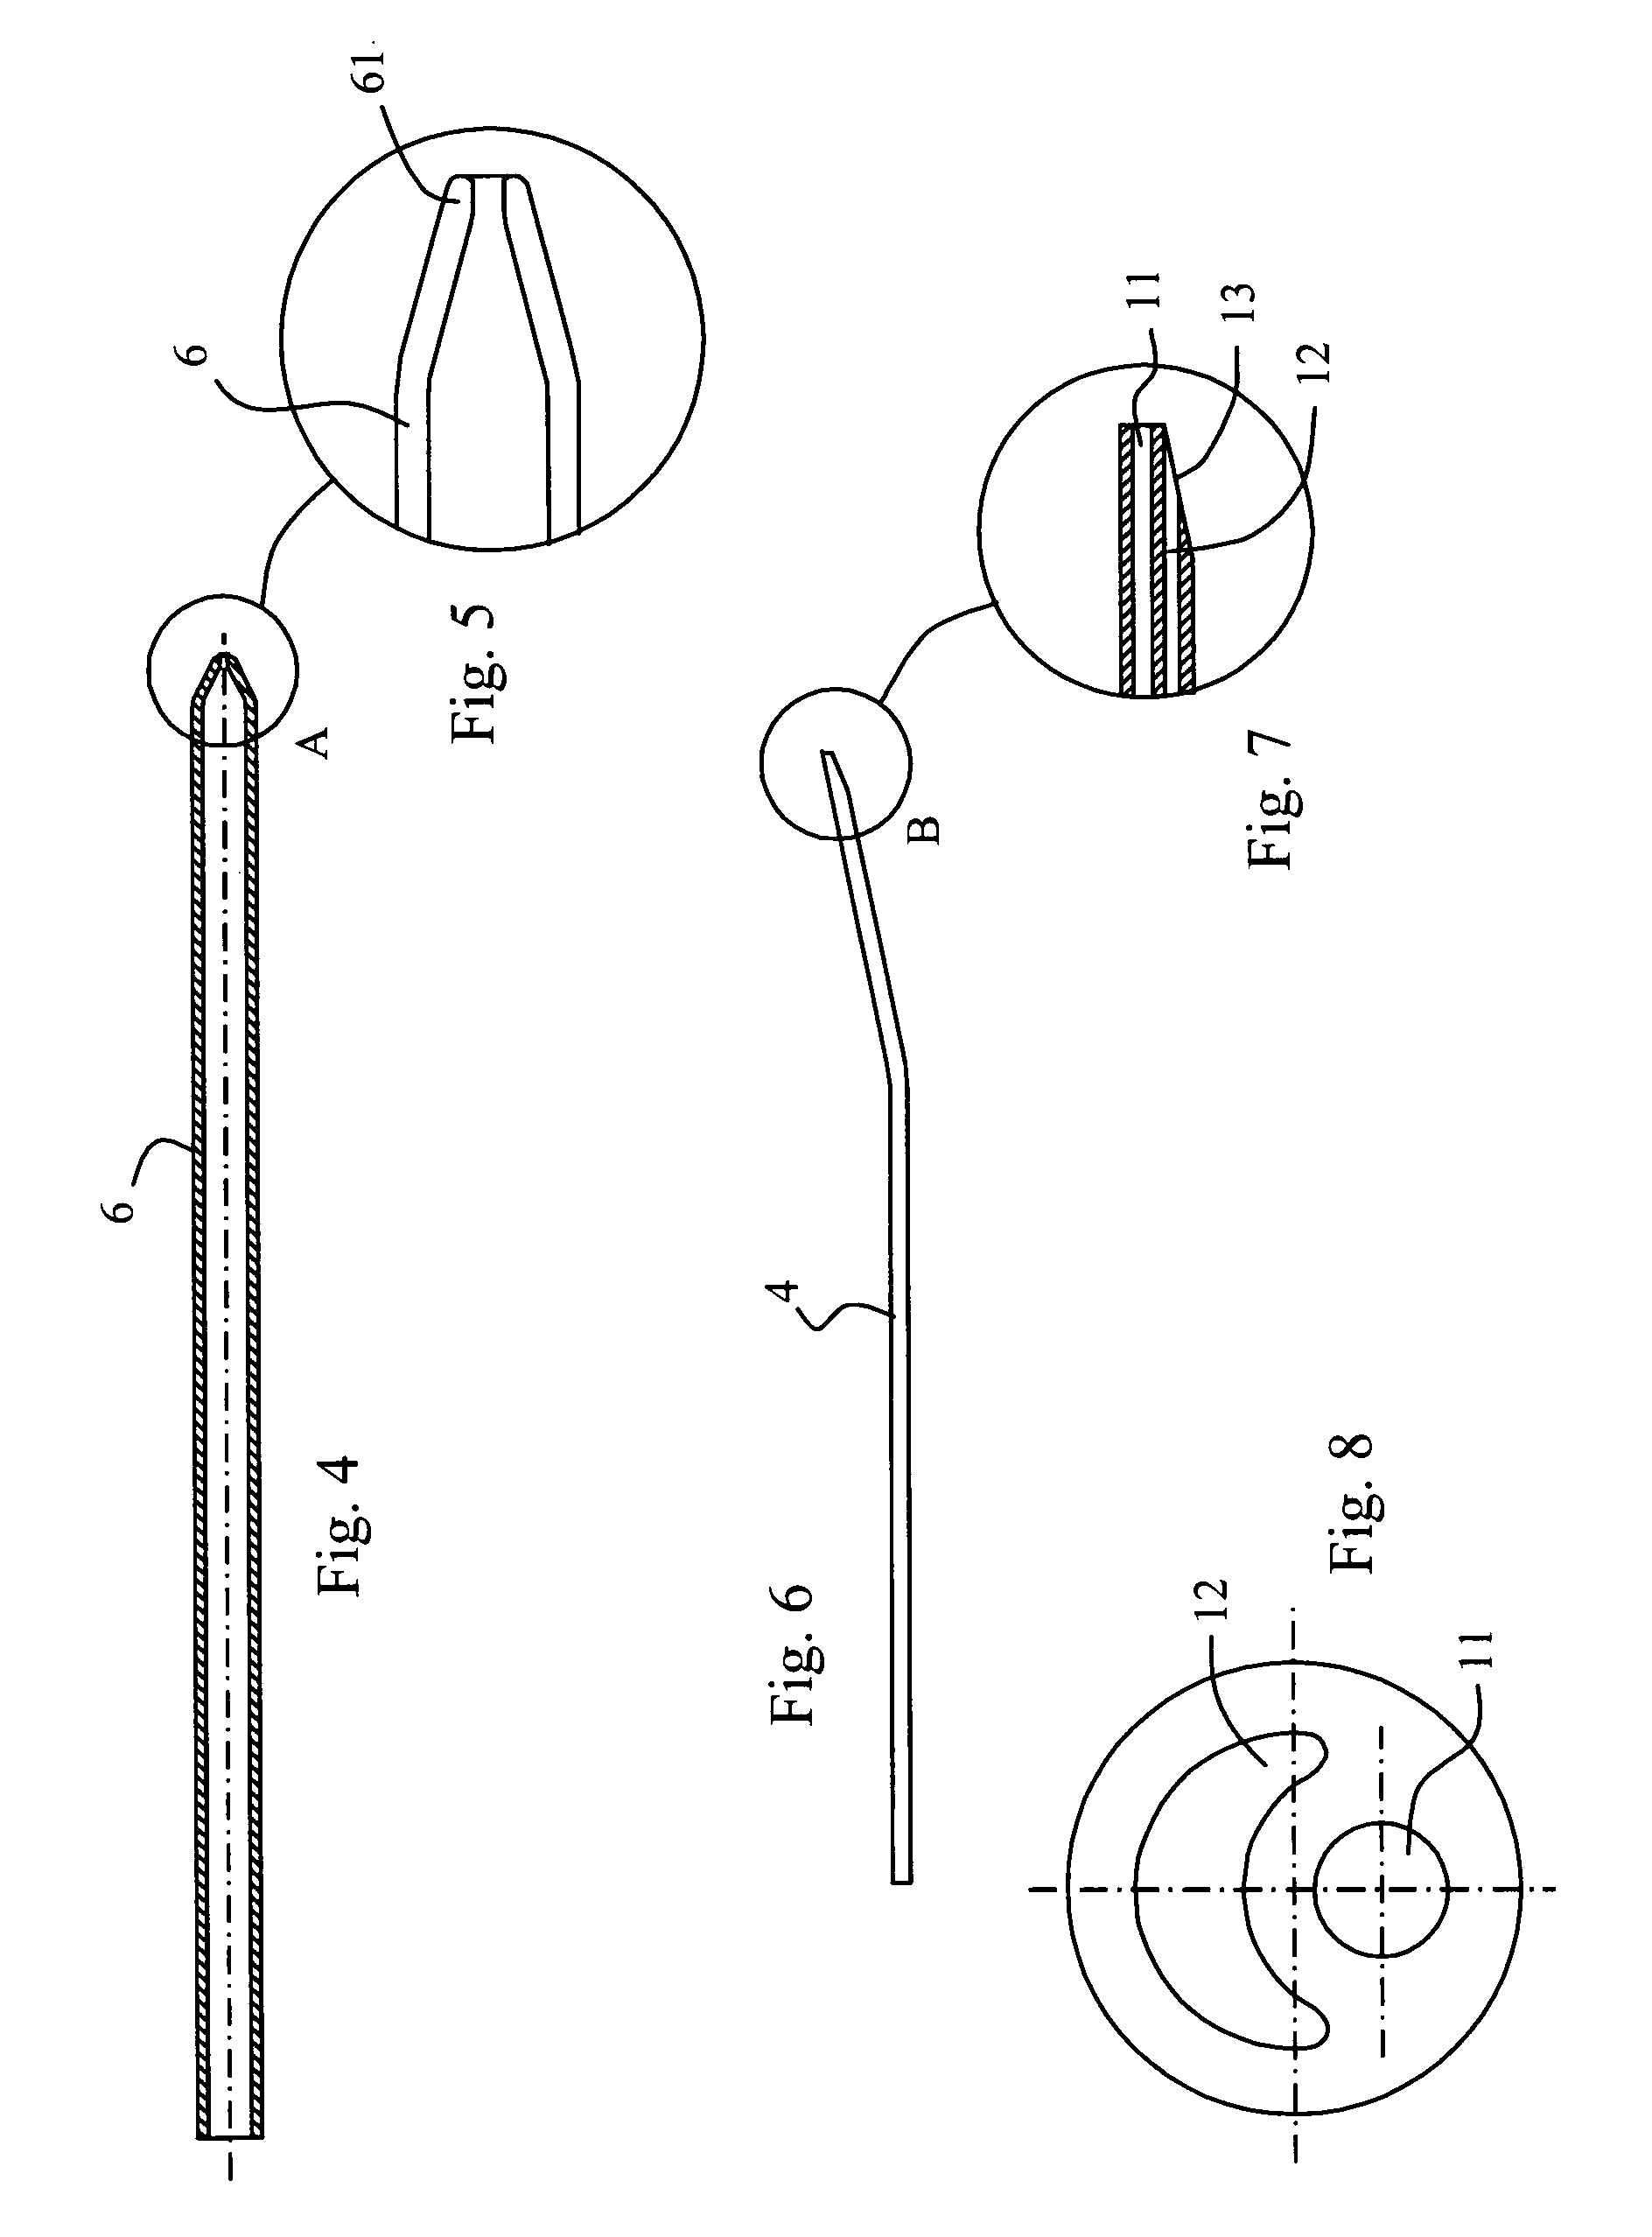 Cryogenic device for surgical use